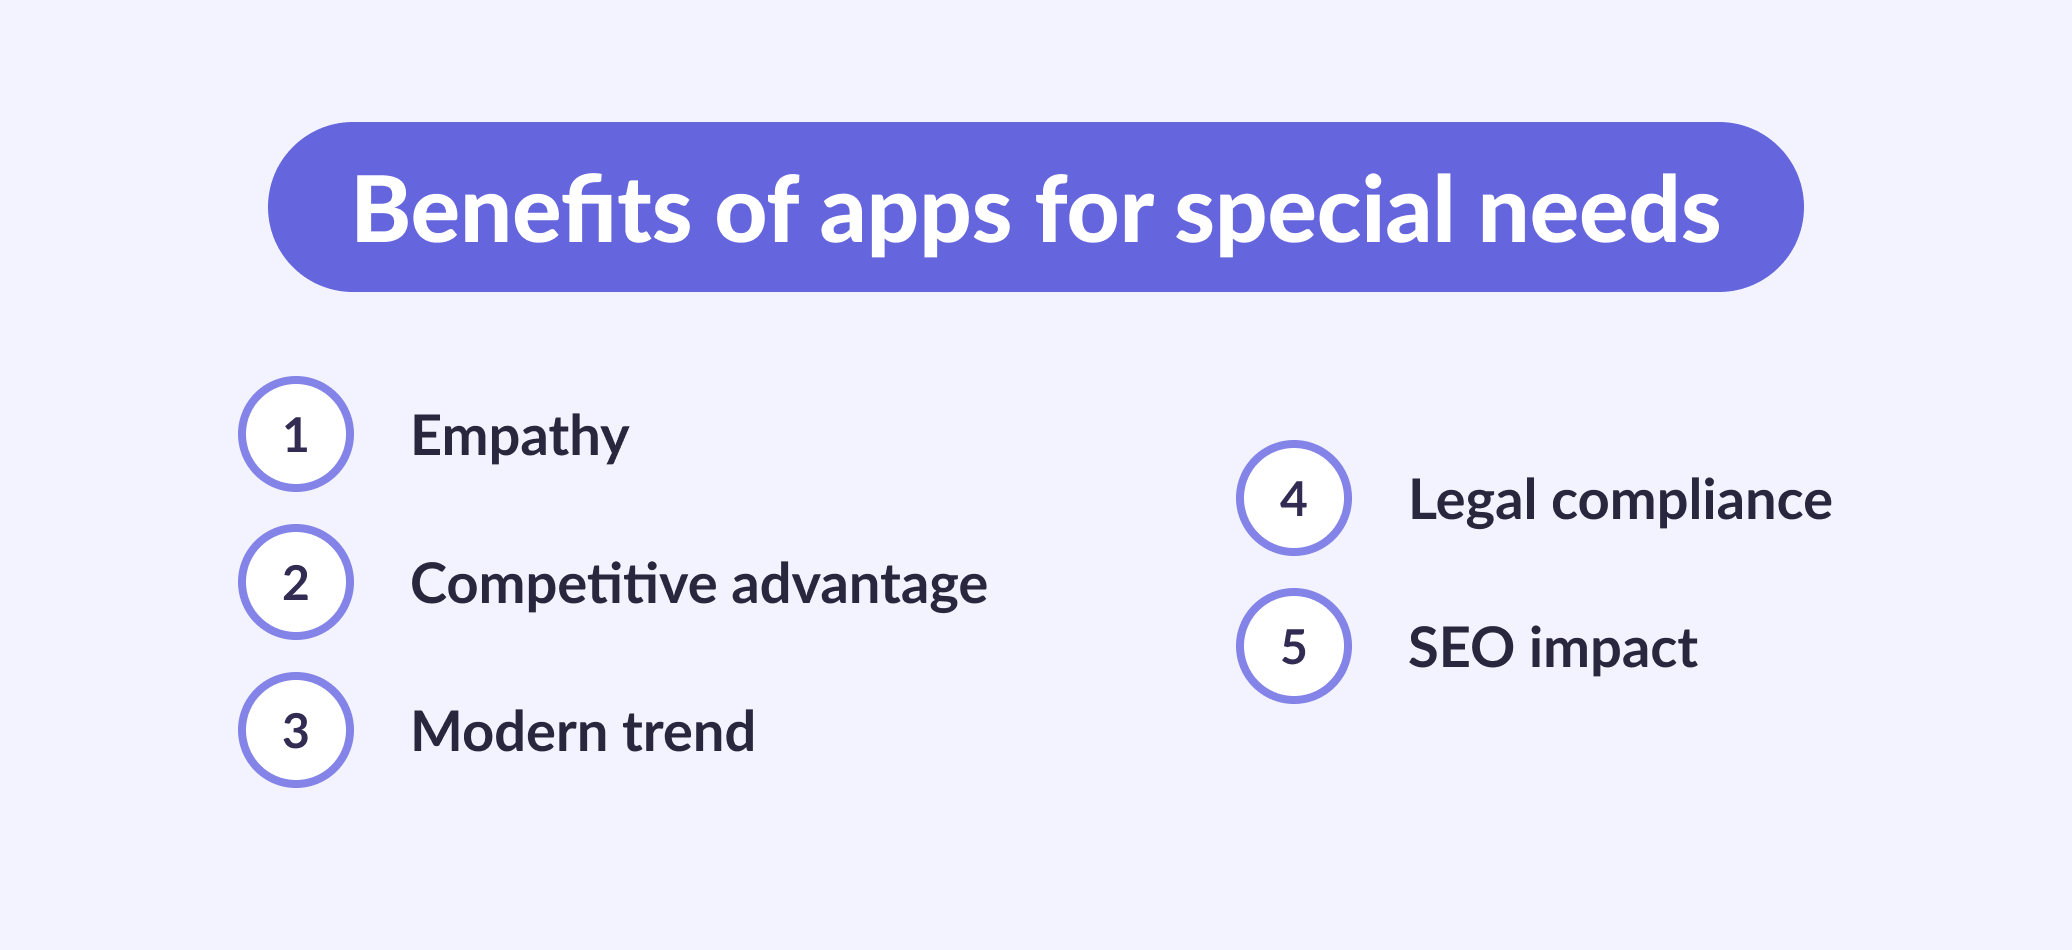 Benefits of apps for special needs